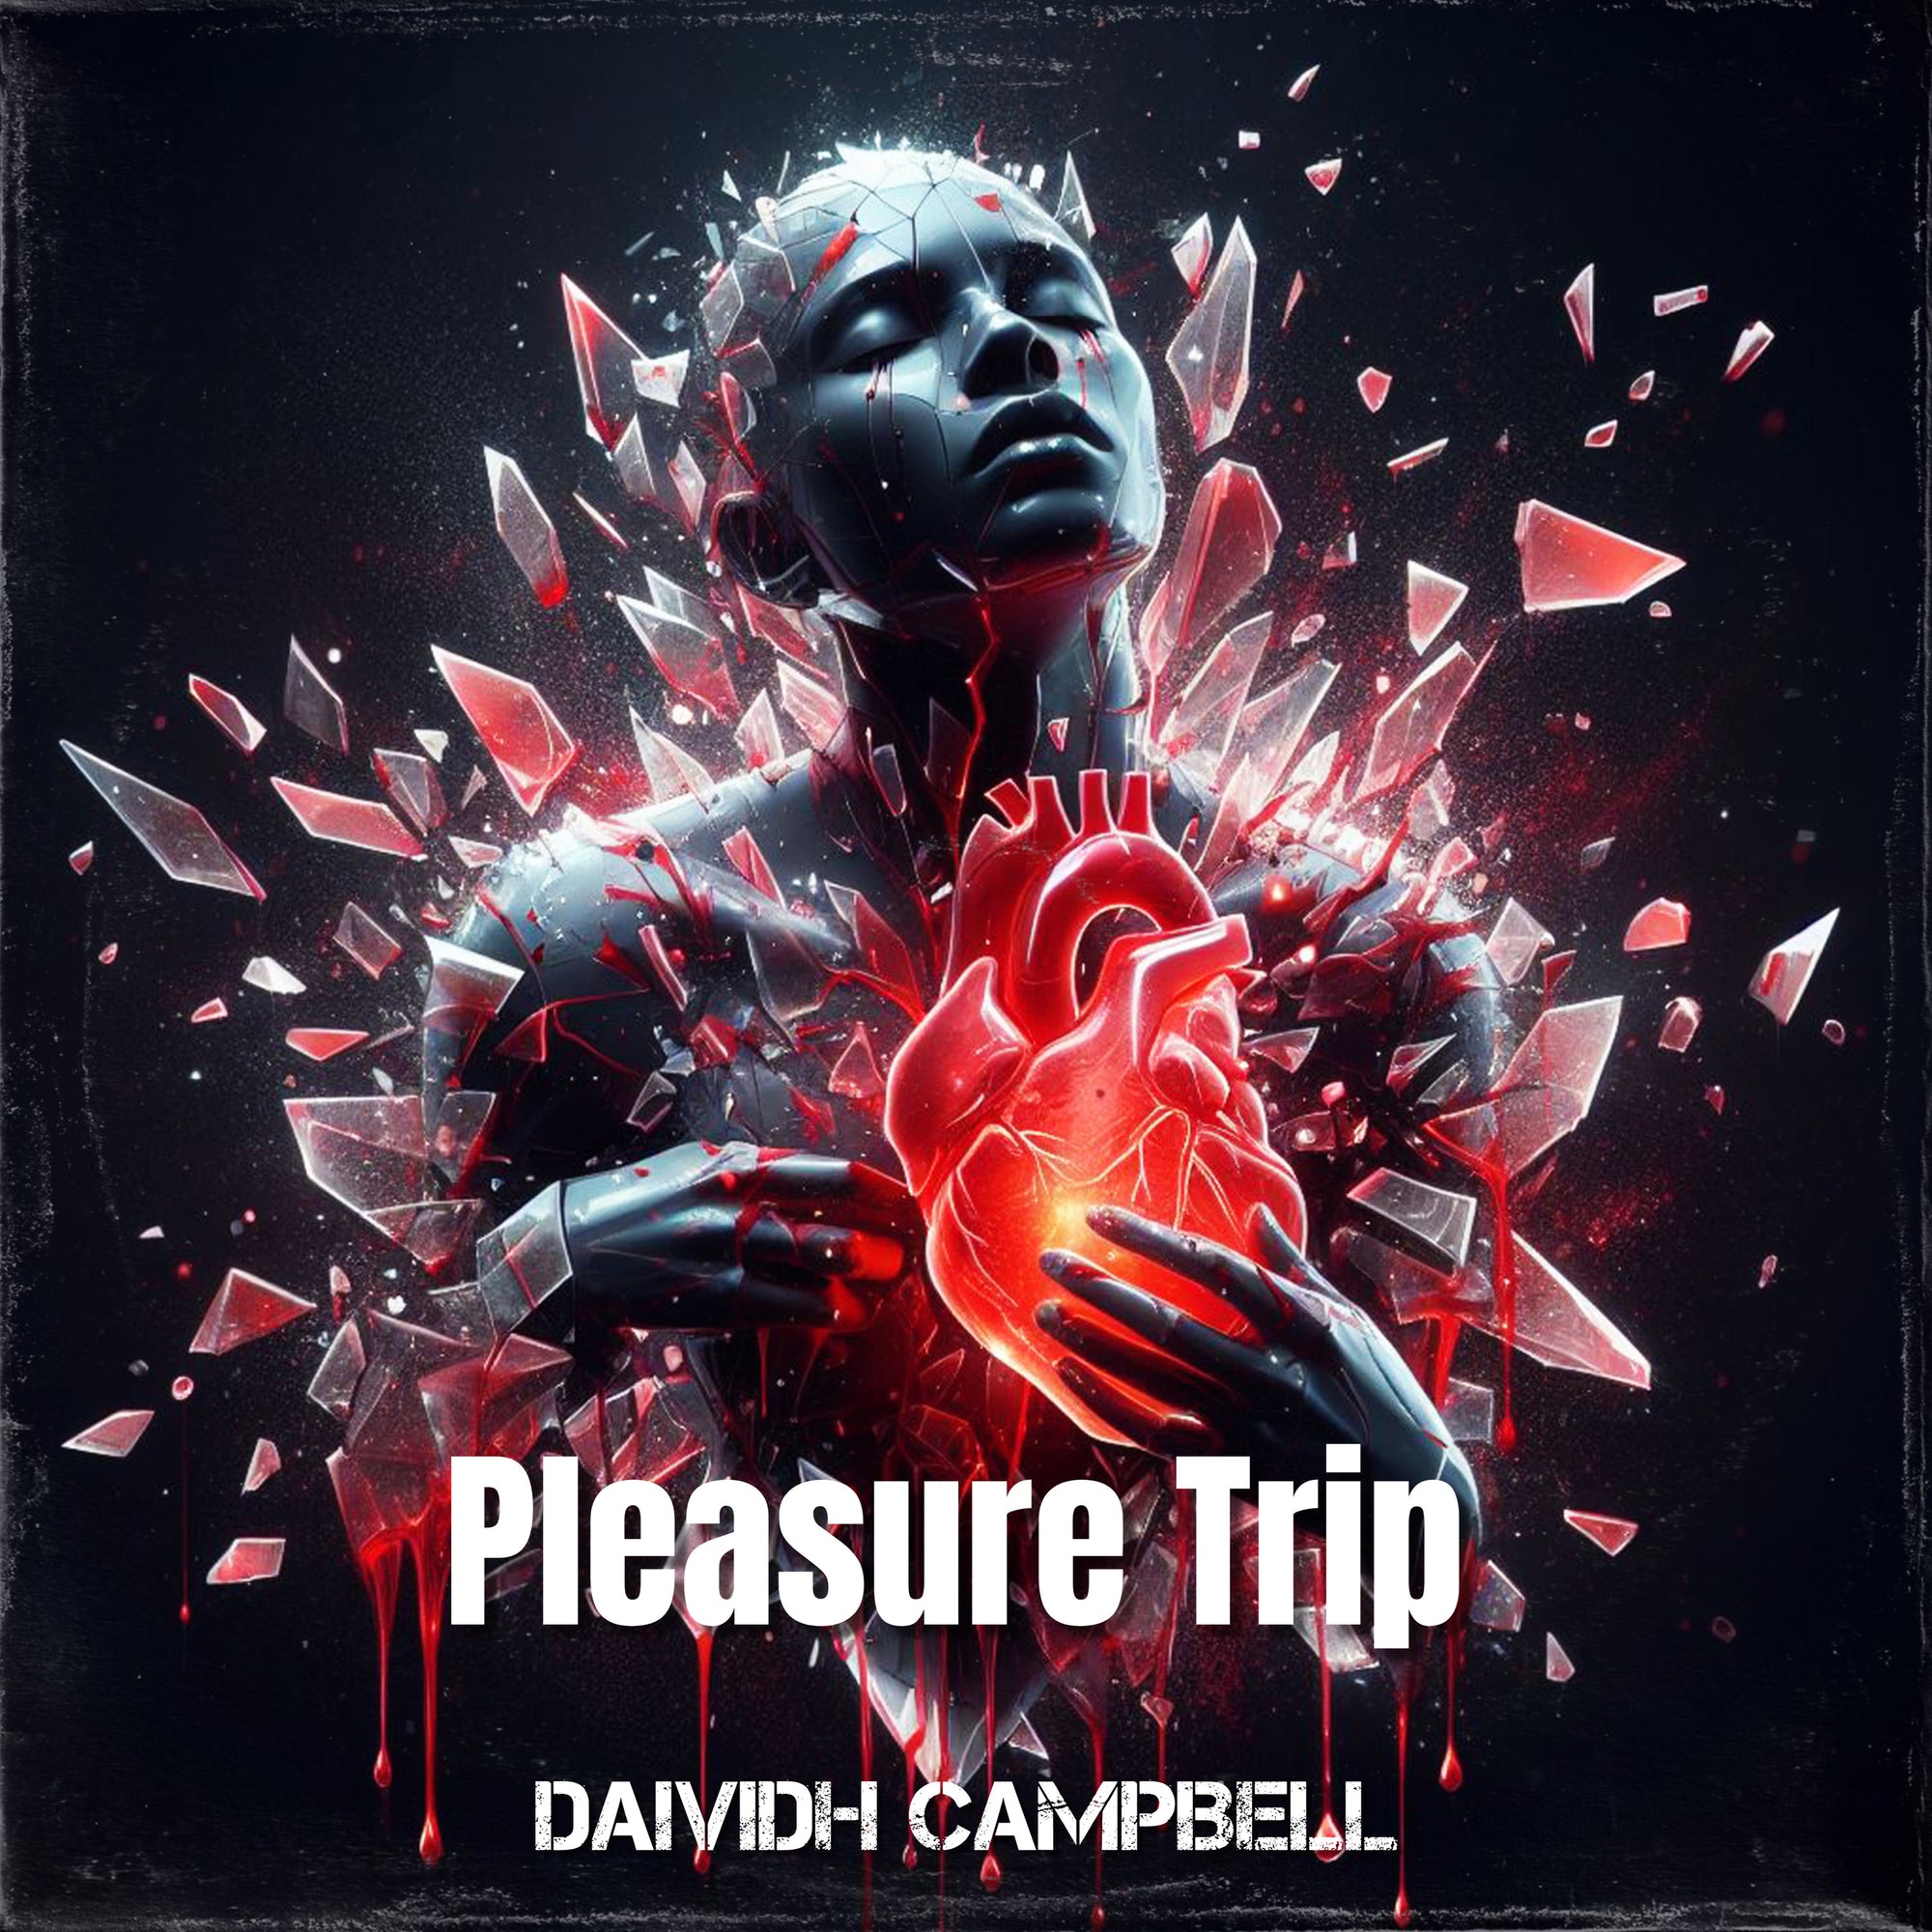 Strange World Music and Daividh Campbell Release a Steamy New Single, 'Pleasure Trip'